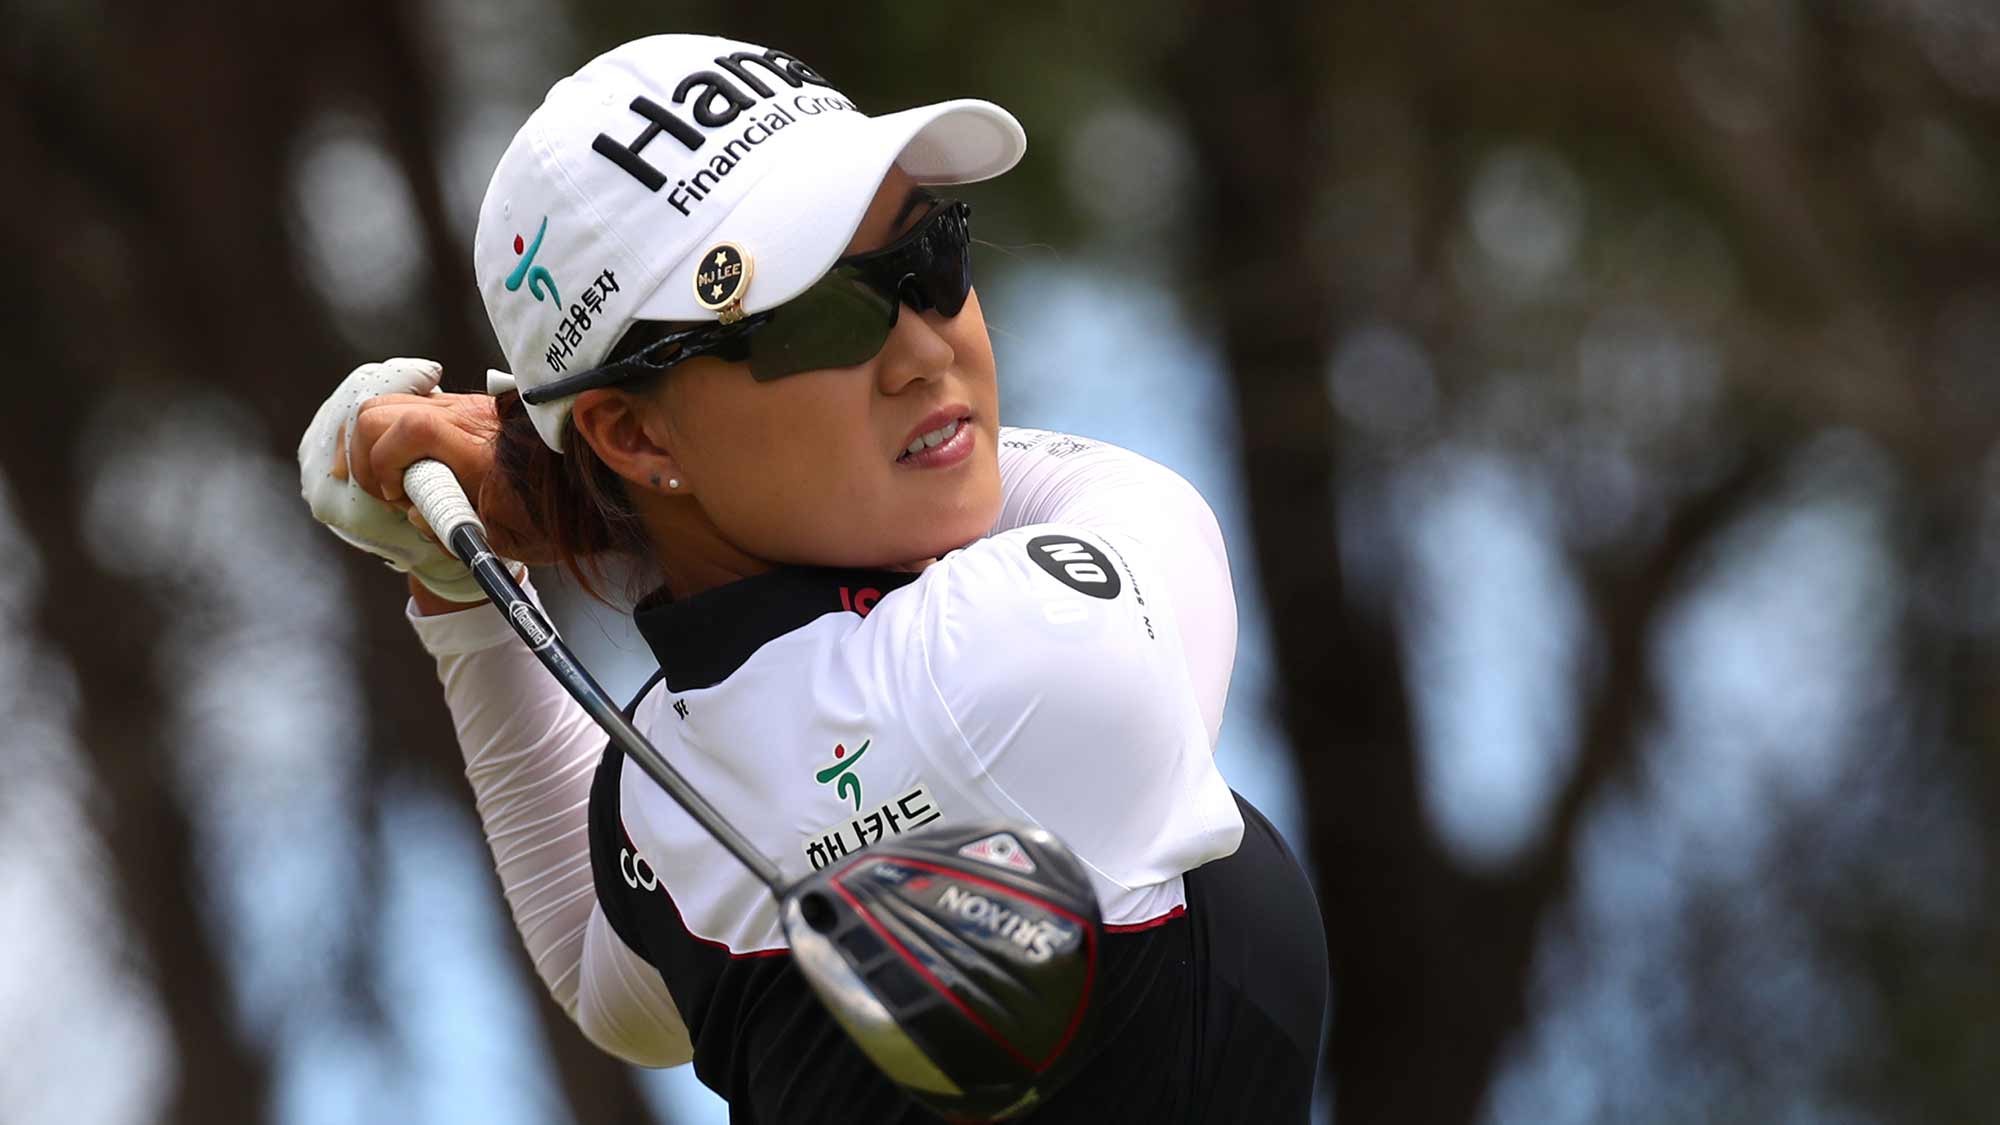 Minjee Lee of Australia watches her drive on the fifth hole during the final round of the LOTTE Championship at Ko Olina Golf Club on April 21, 2019 in Kapolei, Hawaii